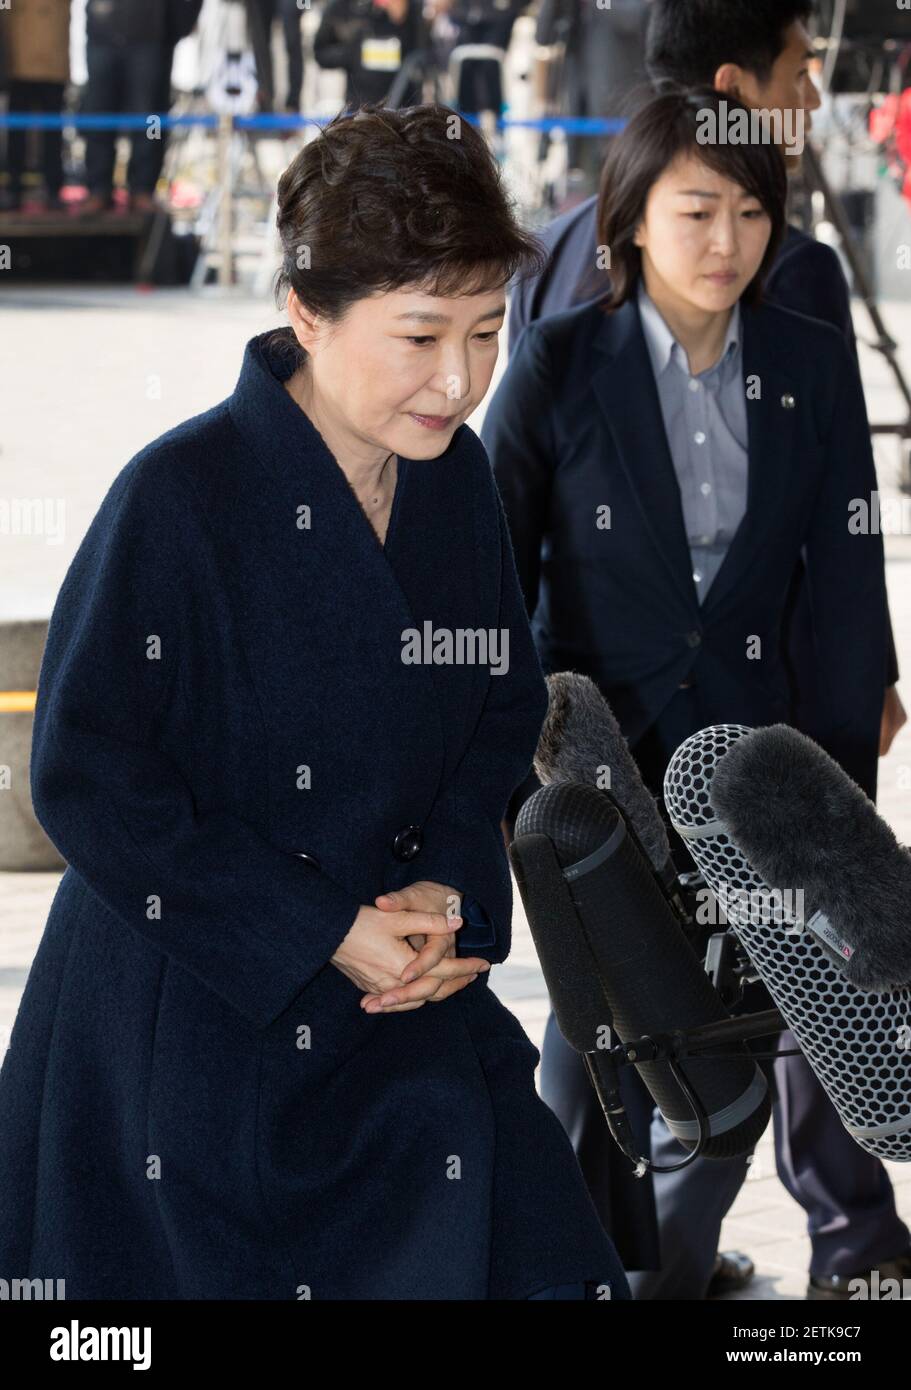 21 March 2017 - Seoul, South Korea : South Korean ousted Park Geun-hye, arrives Seoul Central Prosecutors Office in Seoul, South Korea on March 21, 2017. Park was removed from office after an impeachment vote by the National Assembly was upheld by the nation's Constitutional Court on March 10. Park impeachment stemmed from an alleged extortion and corruption scandal involving Park, her long years friend Choi Soon-sil (Certificated name: Choi Seo-won), and some of the nation's large conglomerates, including Samsung. Park is scheduled to face questioning by prosecutors investigating the scandal  Stock Photo